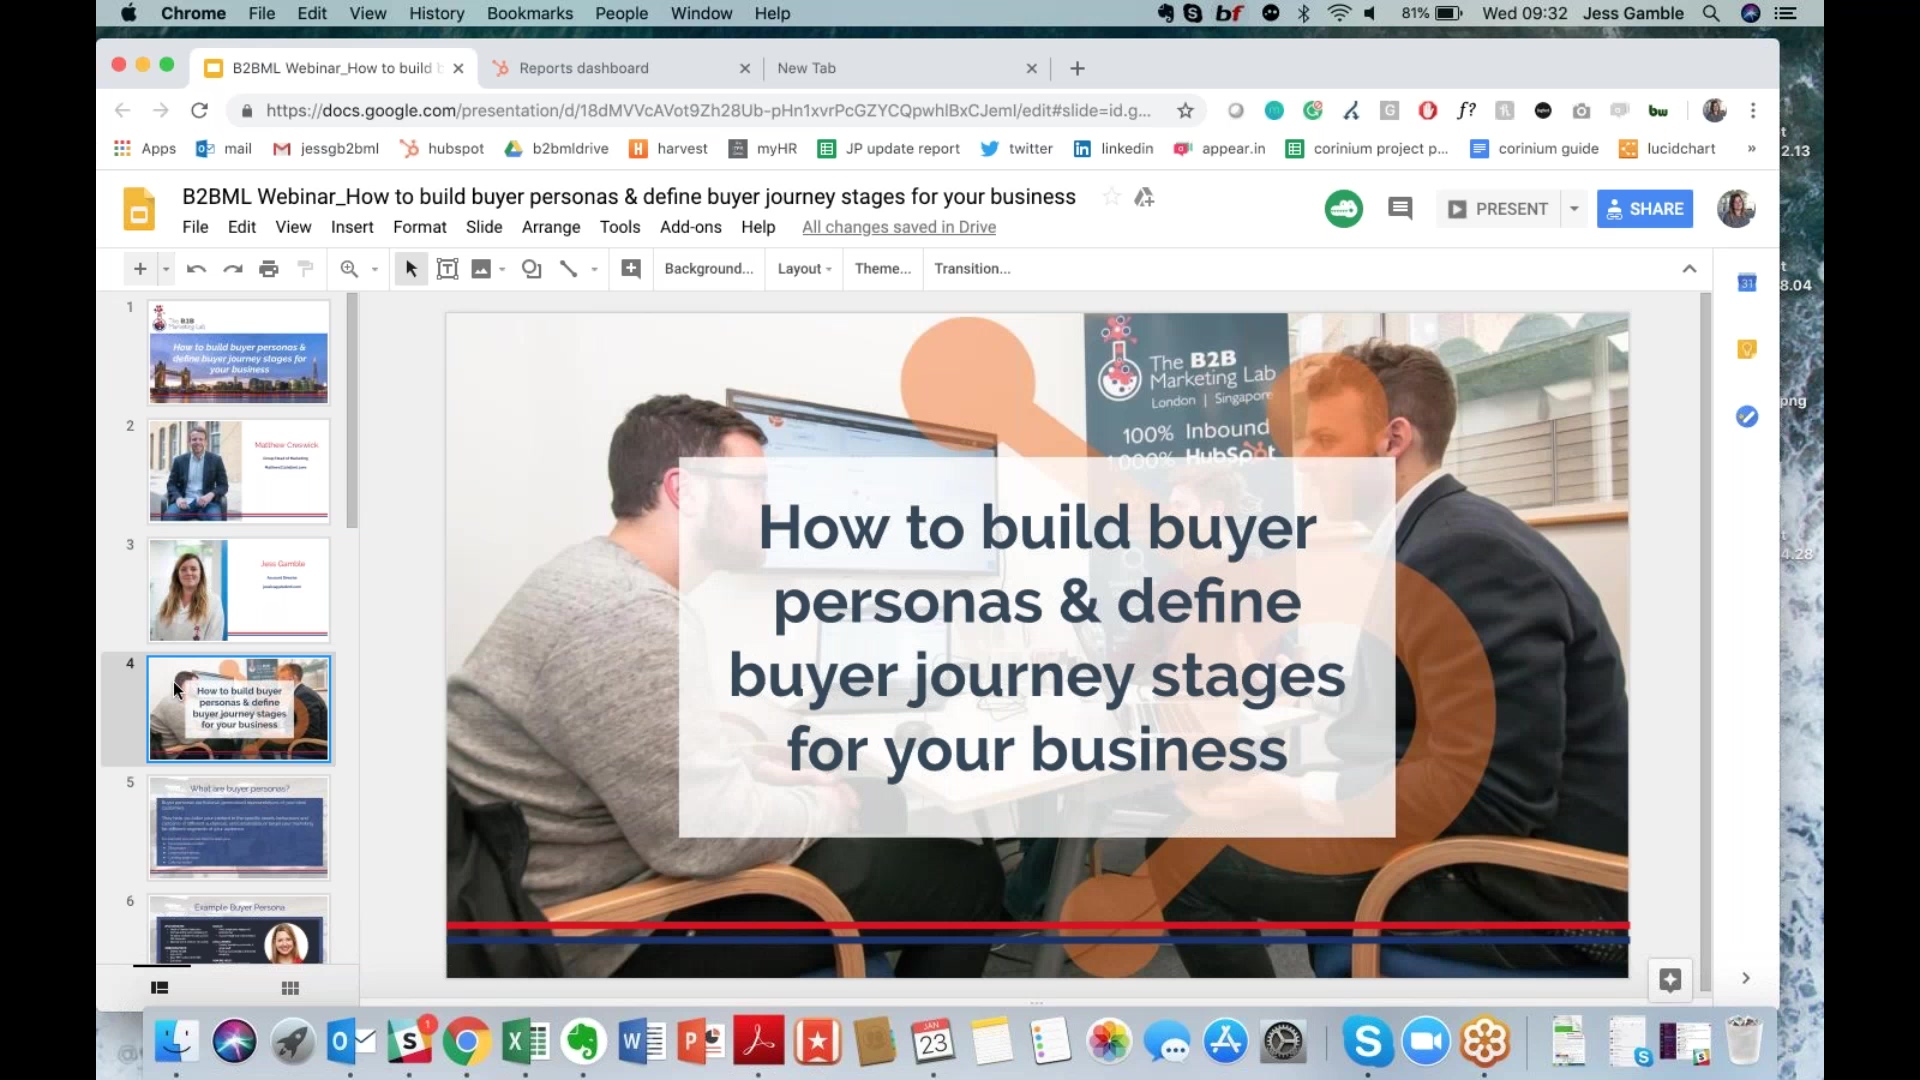 How to build buyer personas & define buyer journey stages for you